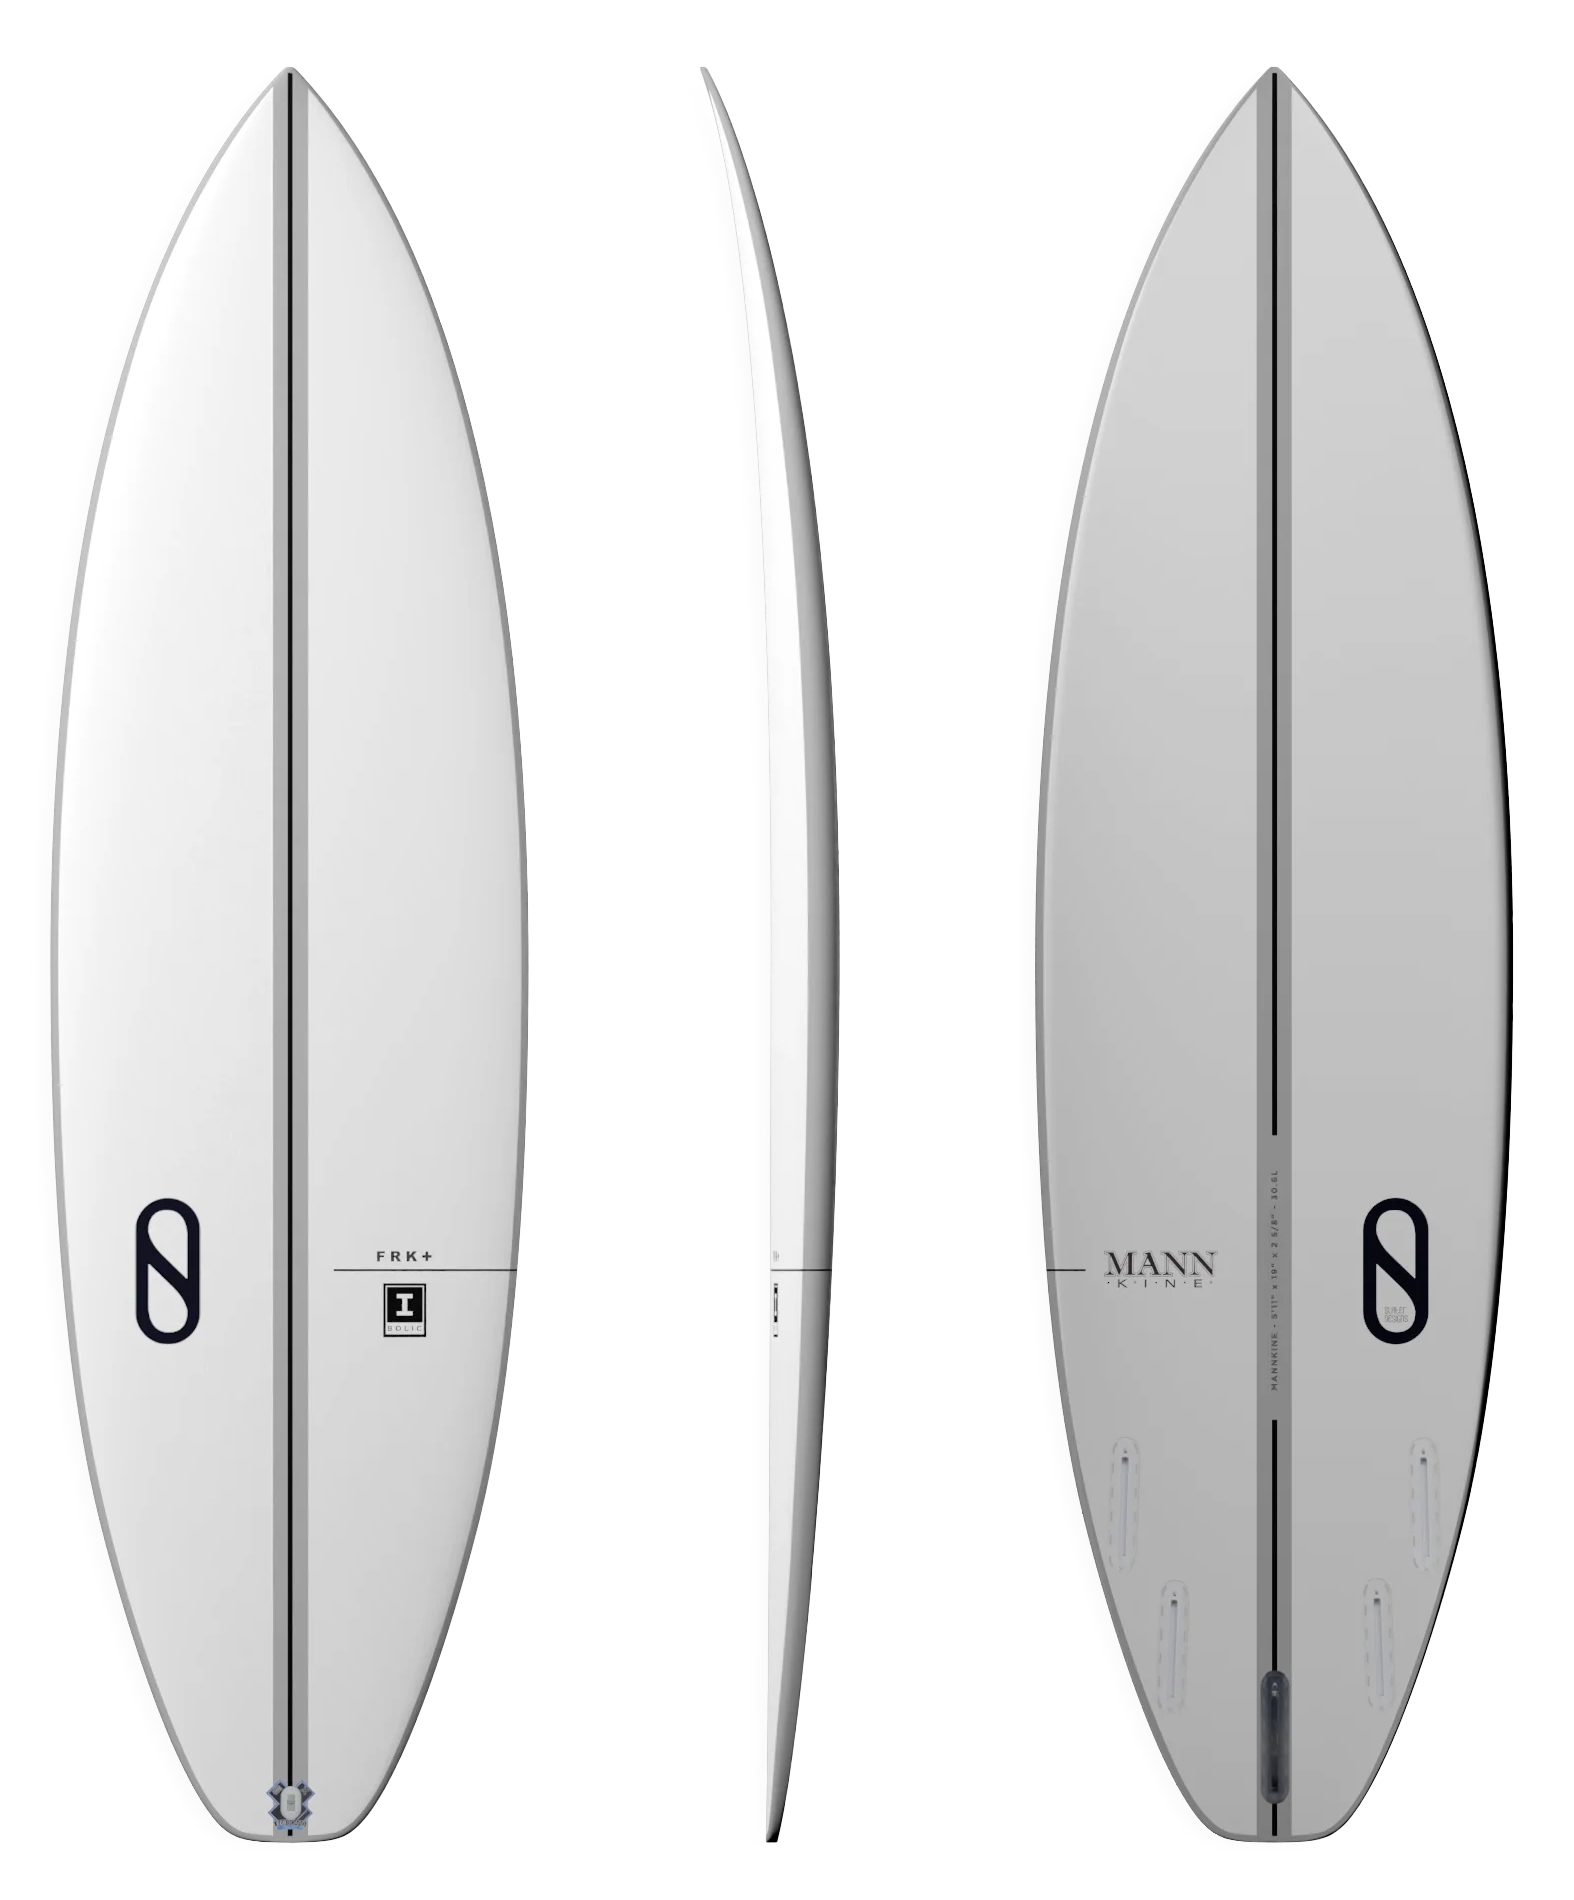 FIREWIRE FRK PLUS IBOLIC KELLY SLATER DESIGNS FUTURES FINS